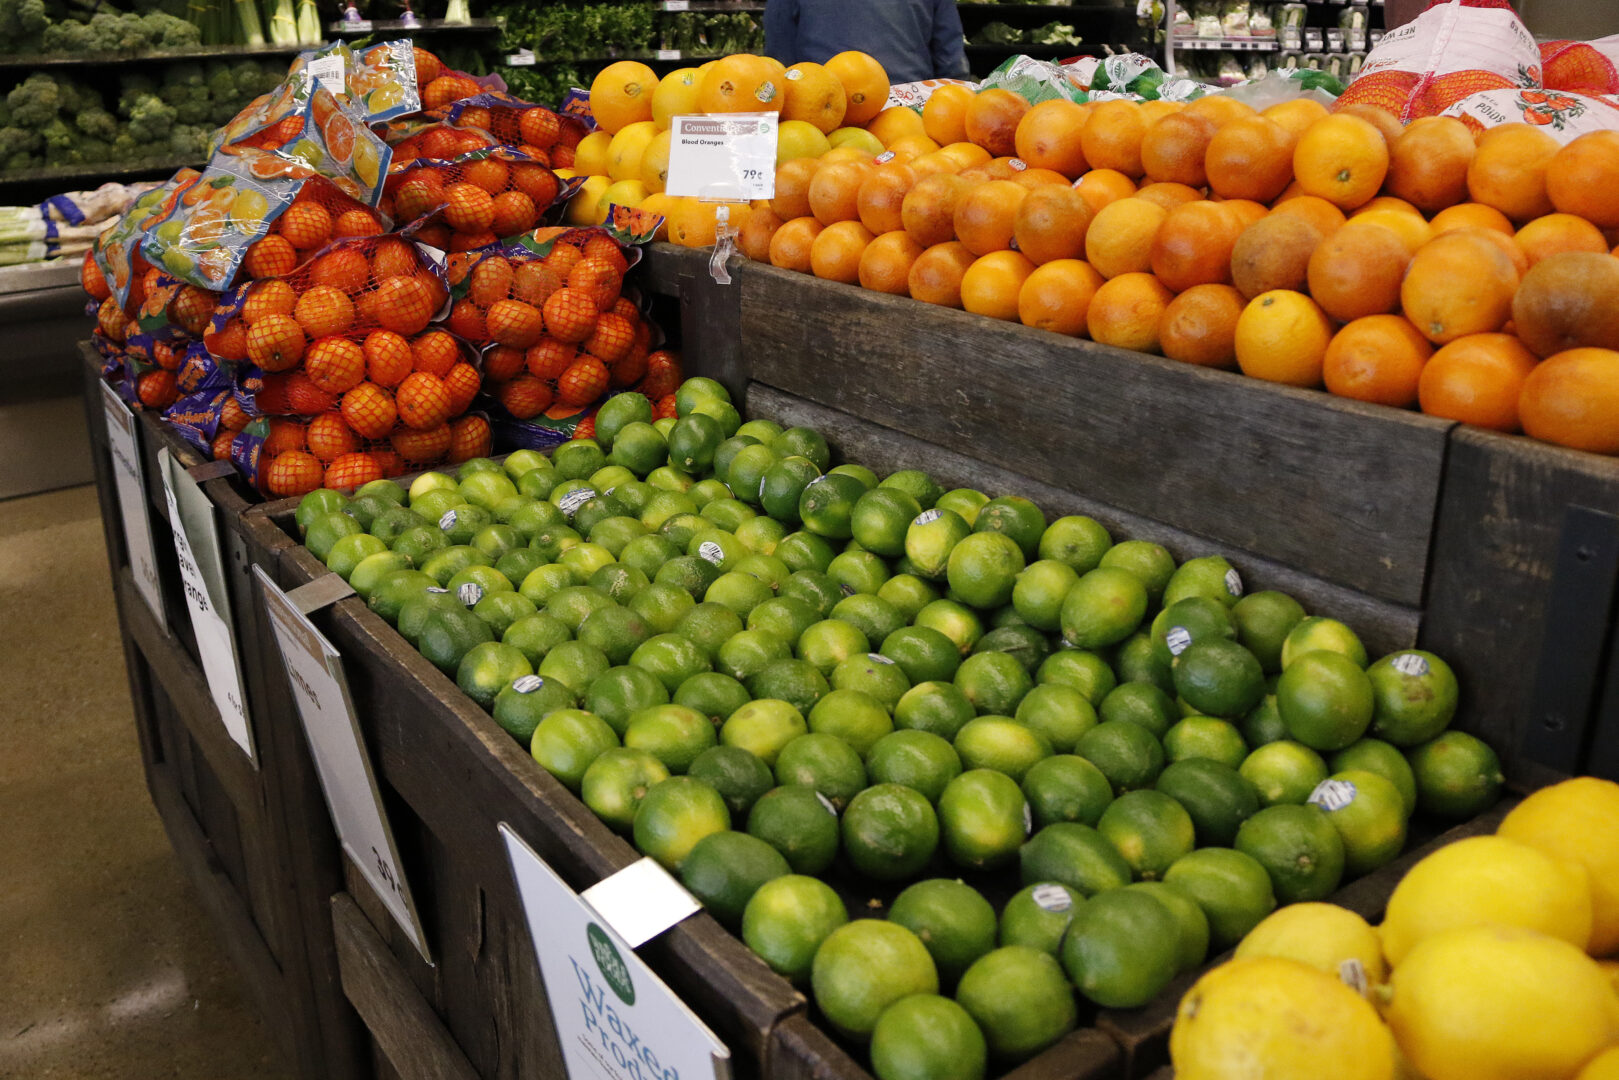 This May 3, 2017, photo shows a display of fruit in a Whole Foods grocery in Upper Saint Clair, Pa. (AP Photo/Gene J. Puskar)